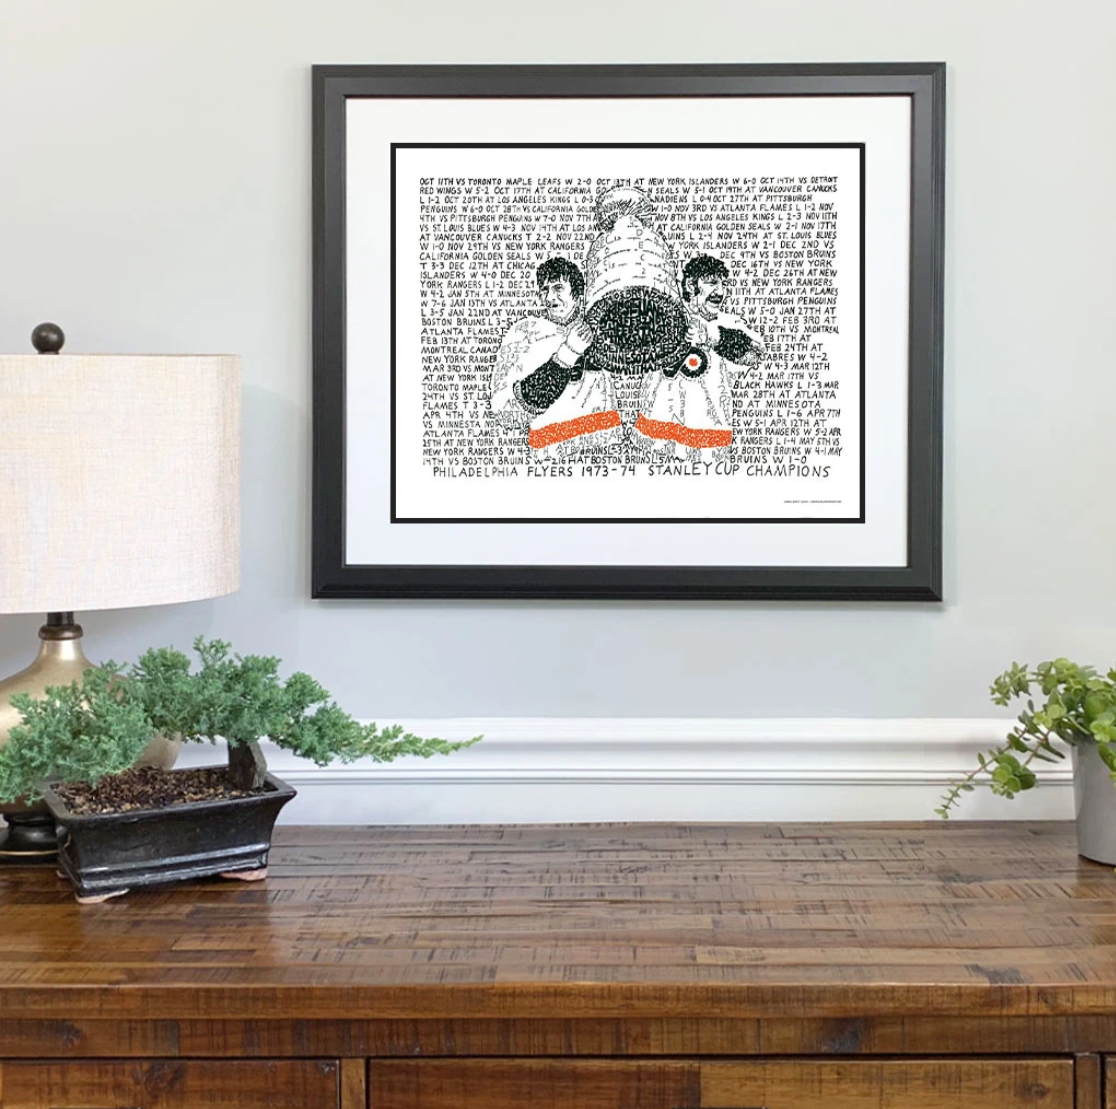 Flyers Road to the 1973-74 Stanley Cup Print by Philly Word Art